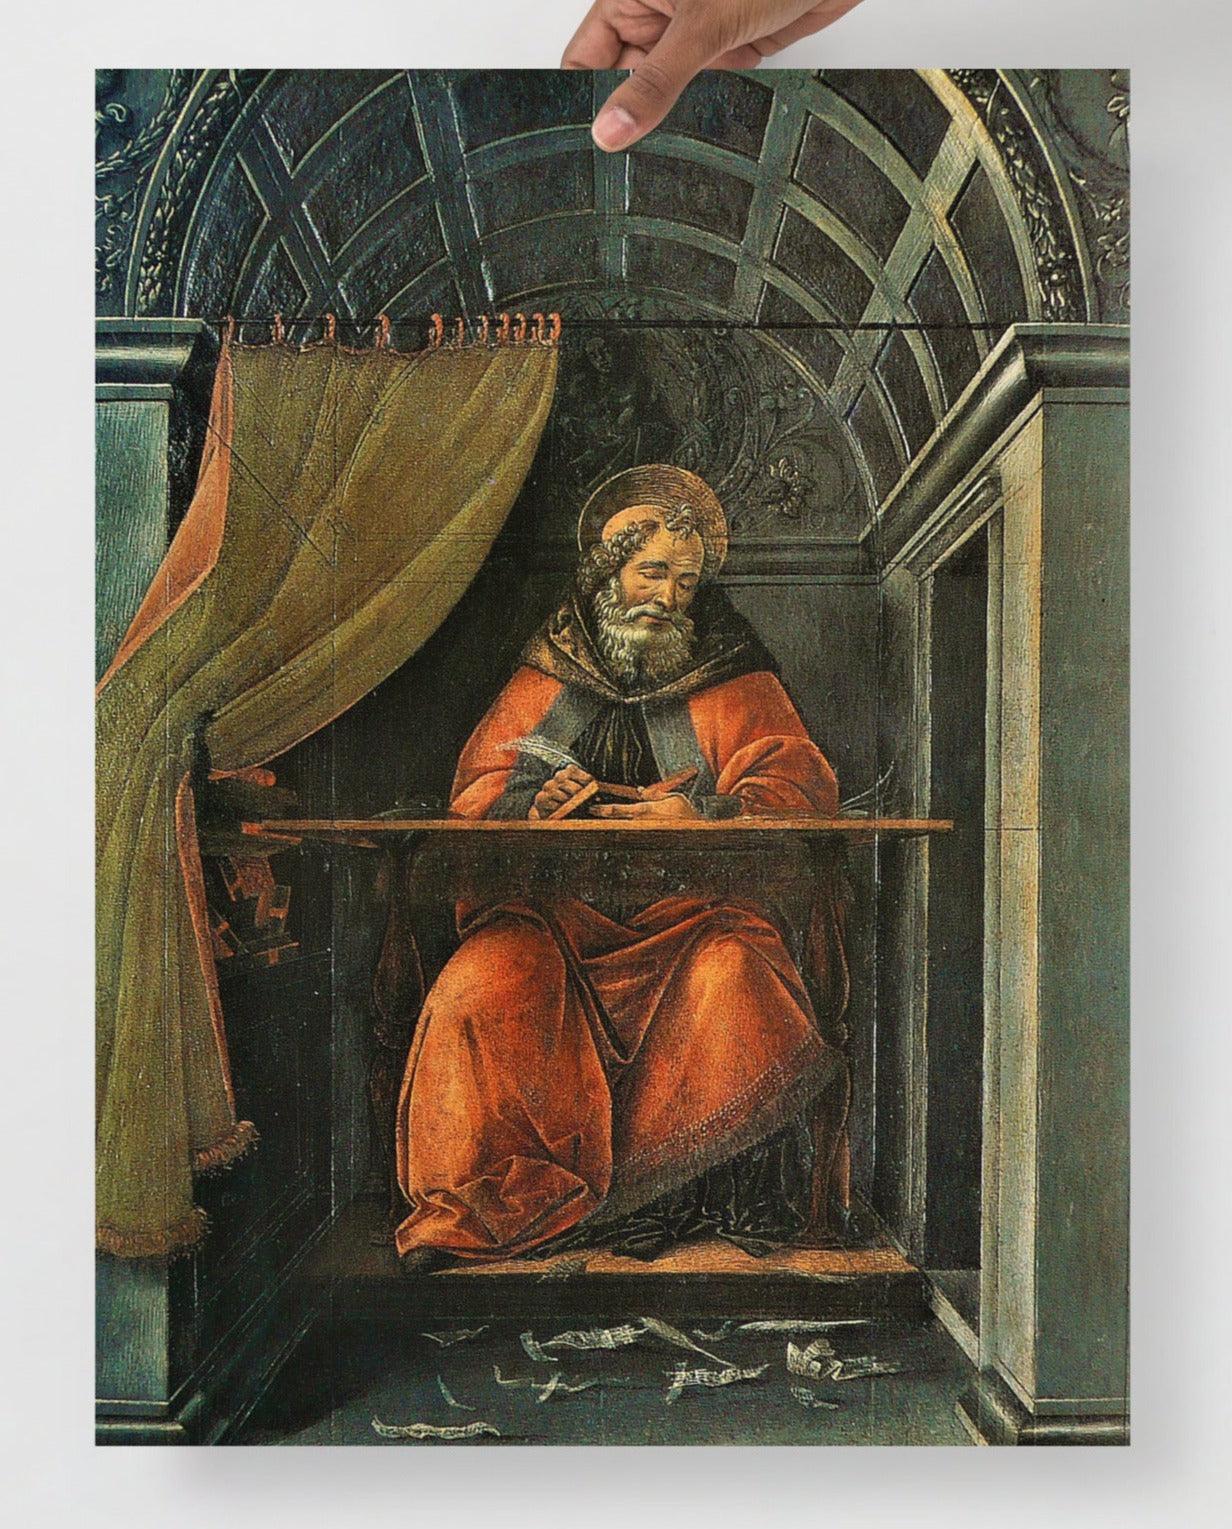 A St. Augustine in his Cell by Sandro Botticelli poster on a plain backdrop in size 18x24”.